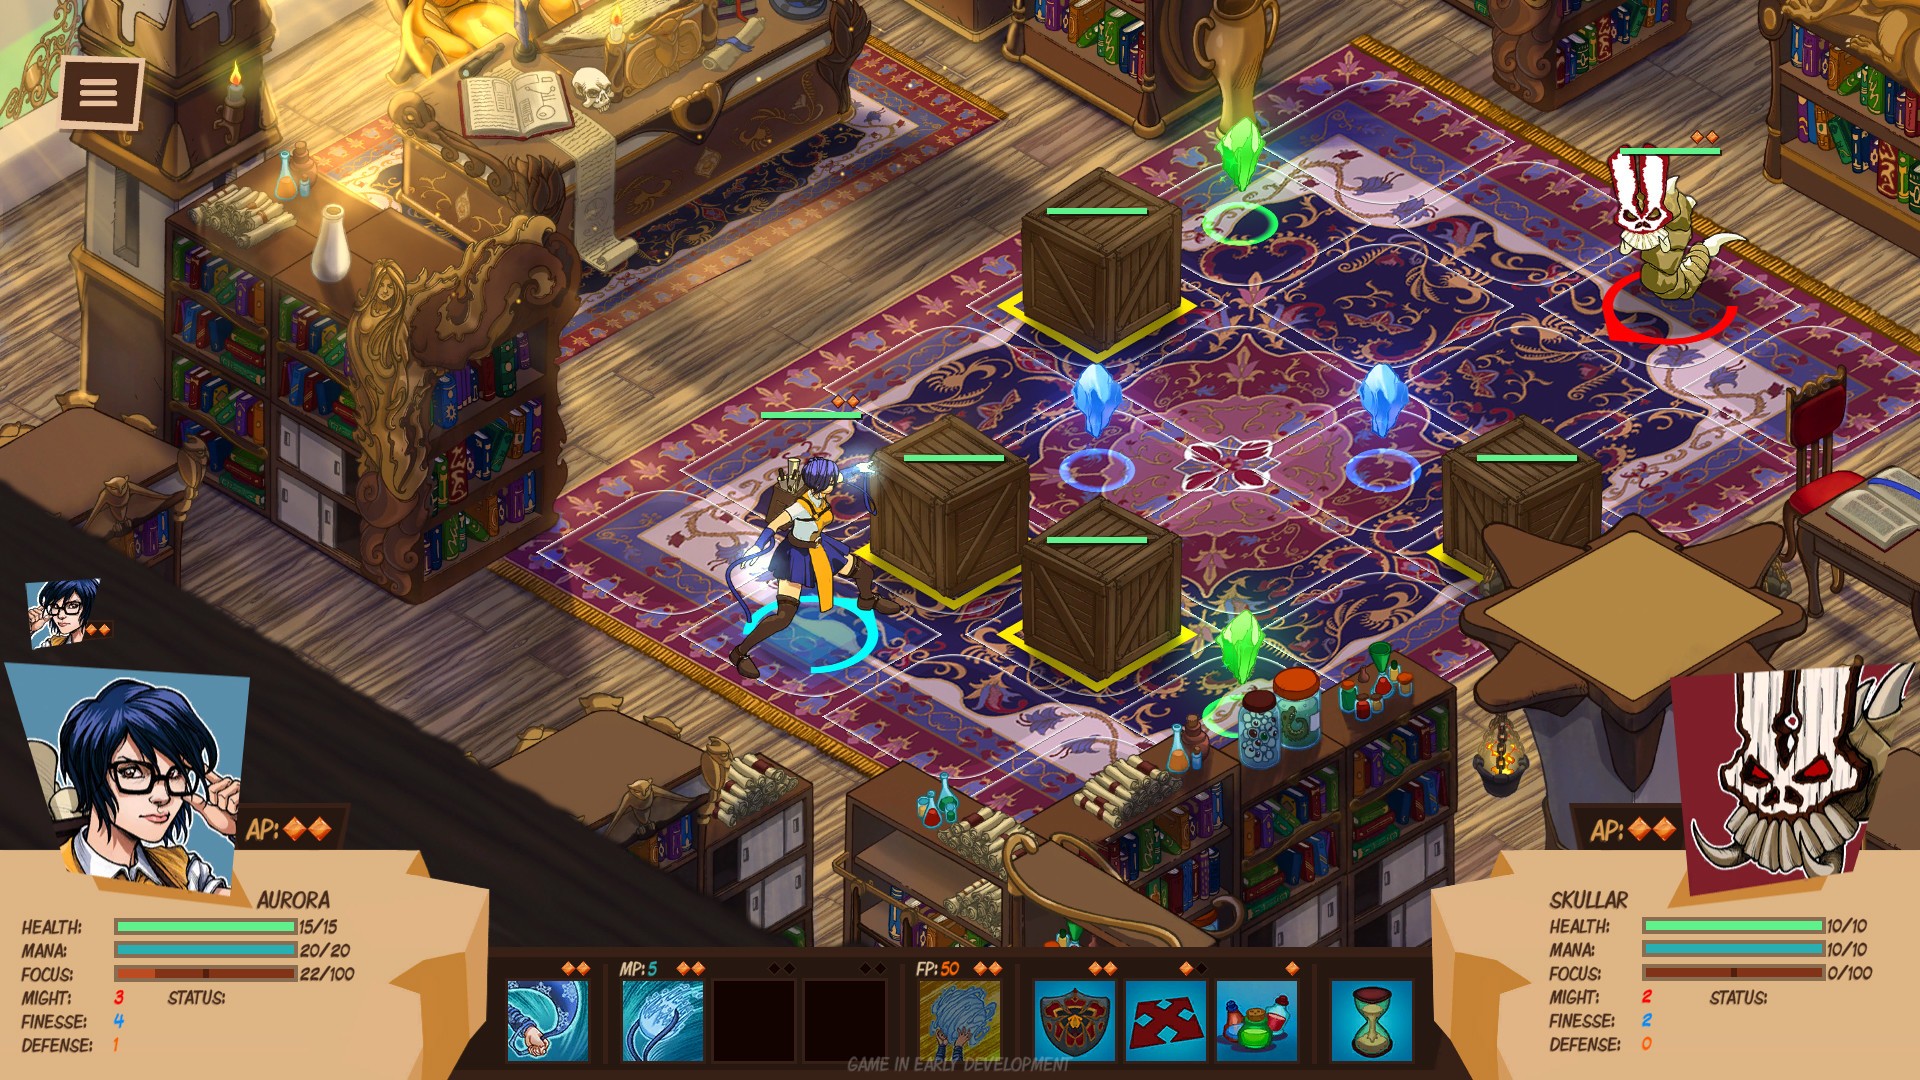 for iphone download Reverie Knights Tactics free